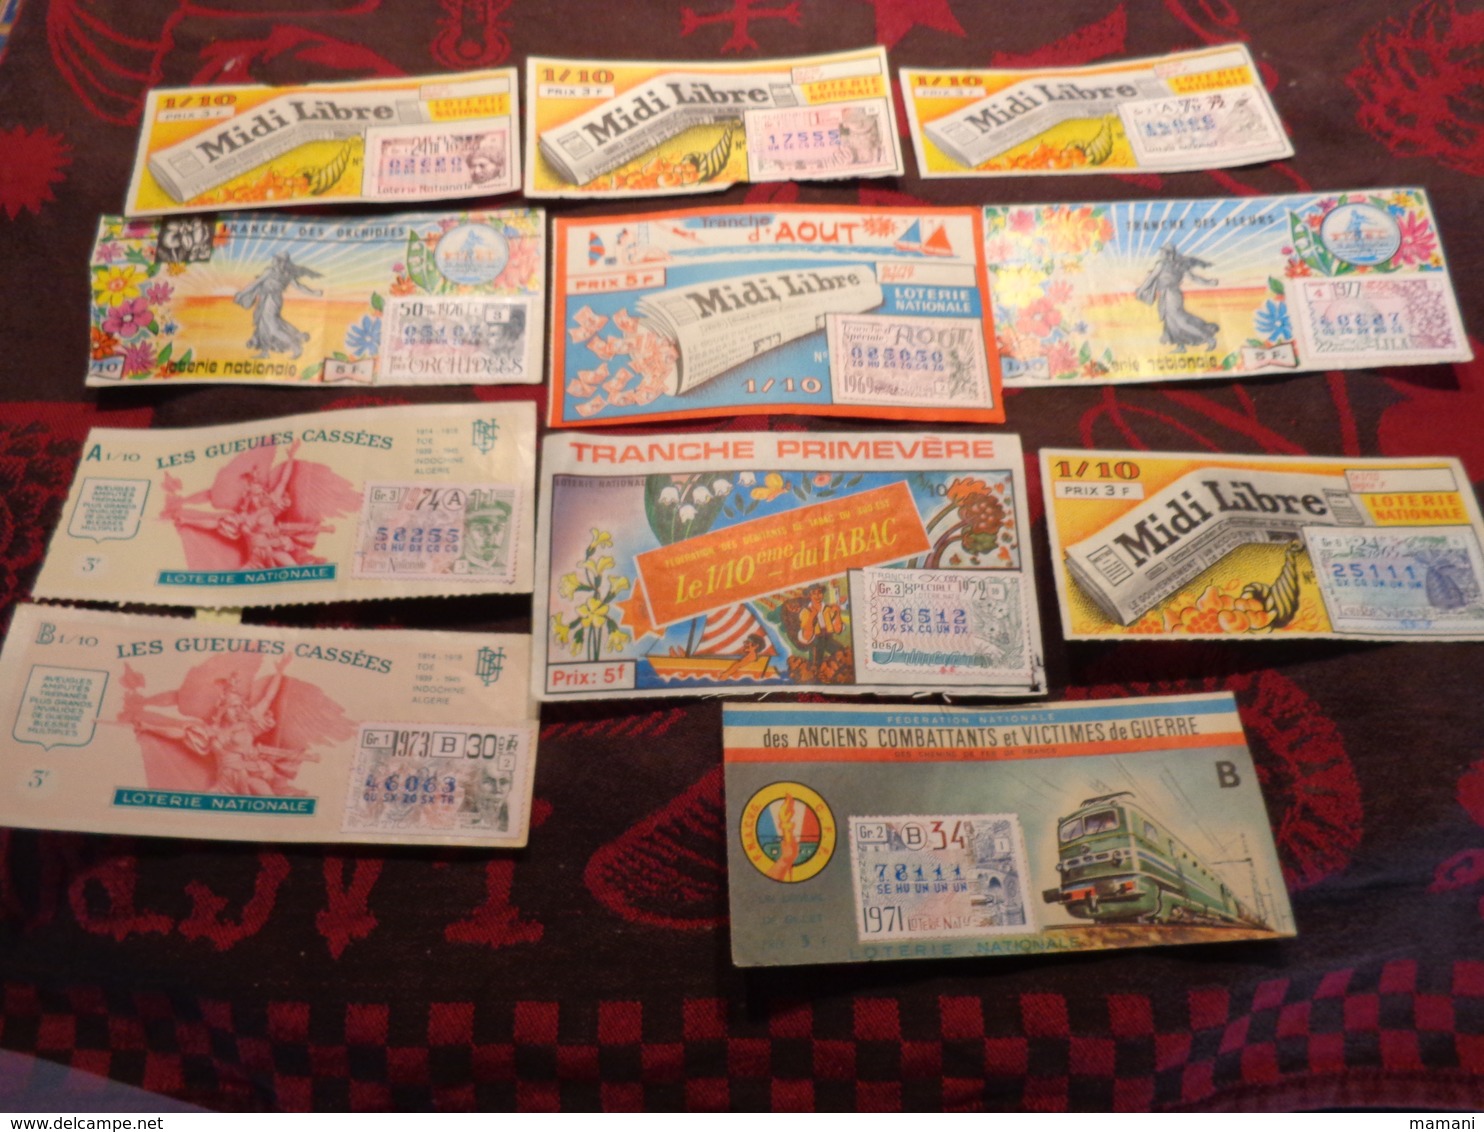 12 Billets Loterie Nationale - Lottery Tickets